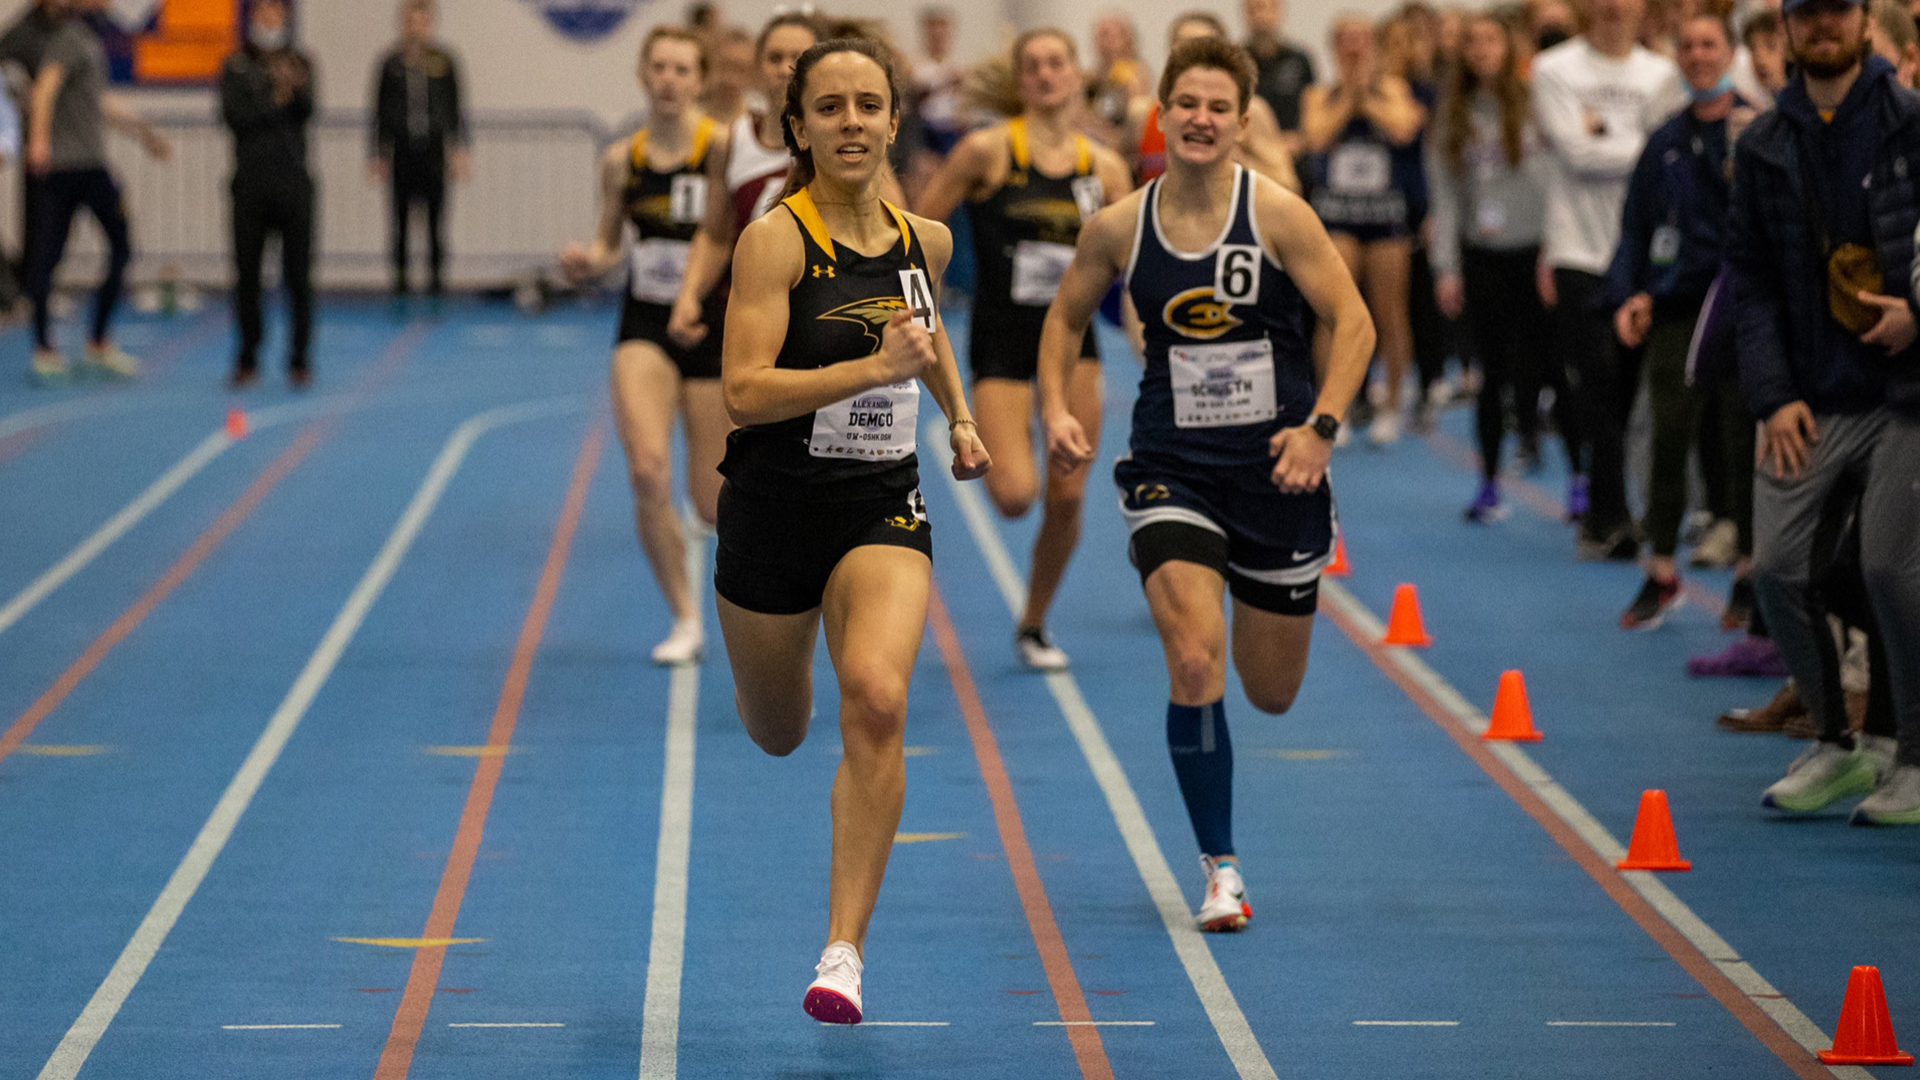 Alexandria Demco won the 800-meter and mile runs and helped the Titans' distance medley relay team finish first at the WIAC Championship.